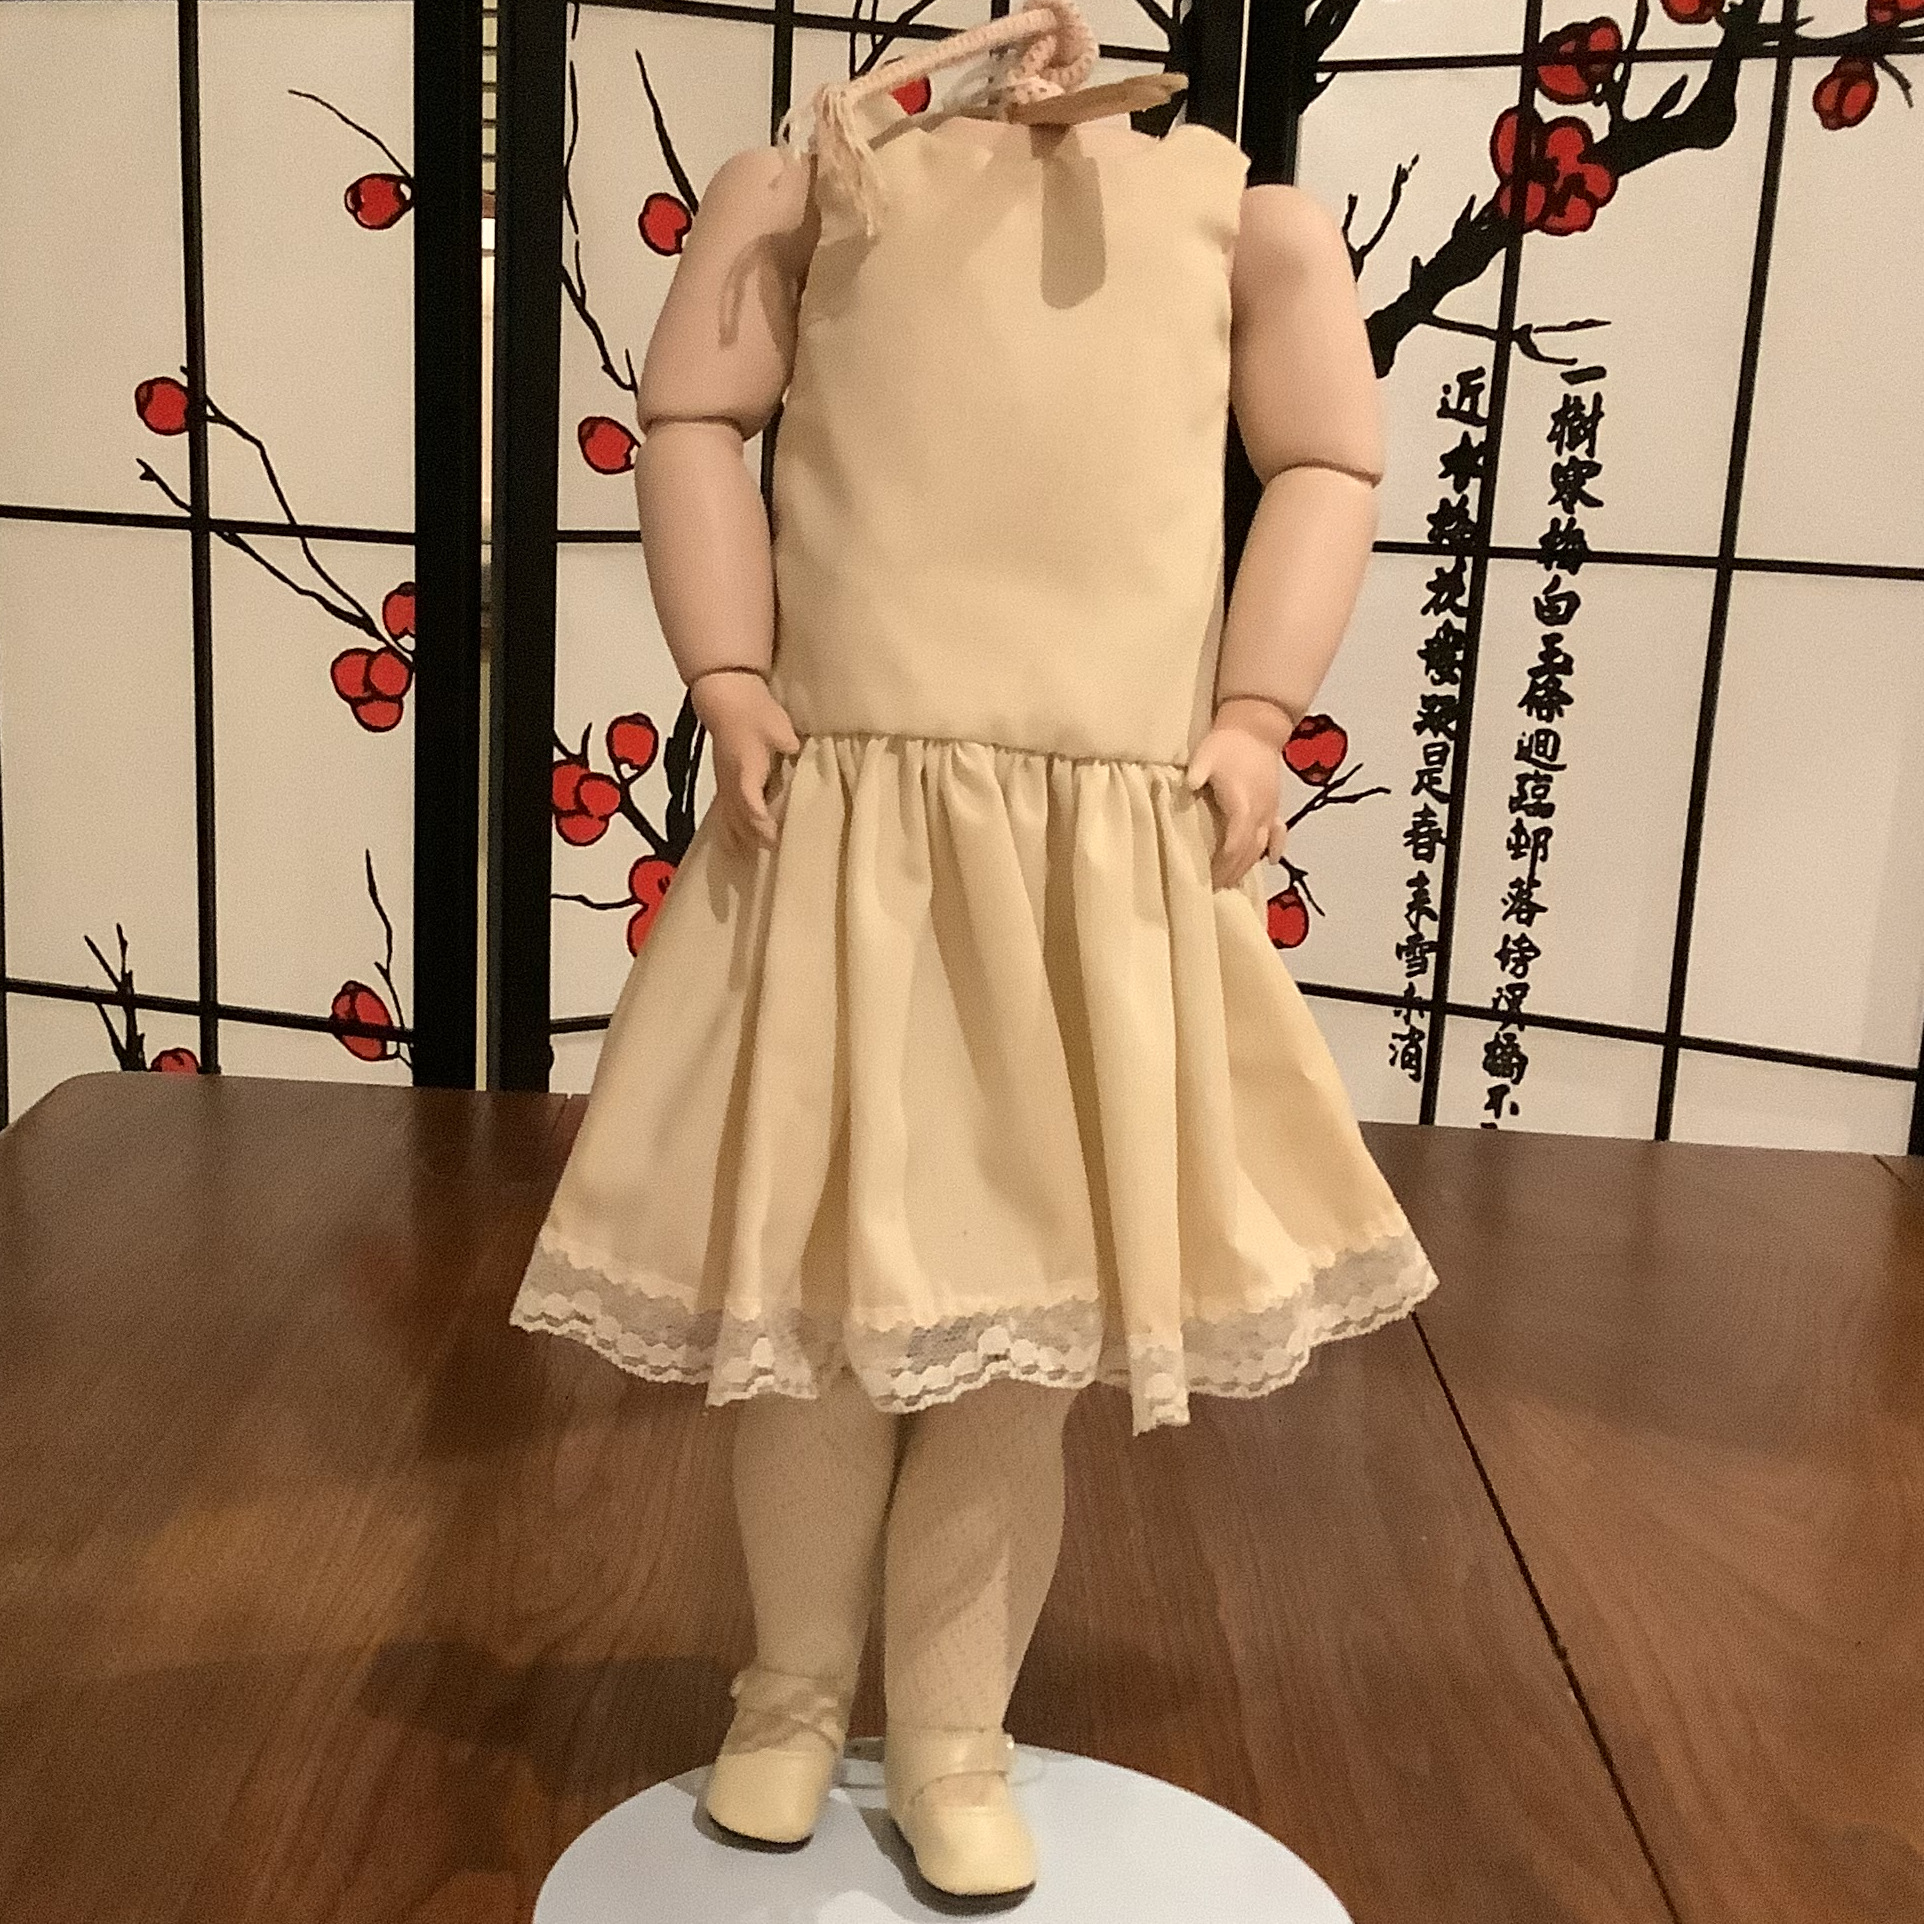 Composition doll body in off-white cotton slip, head not included